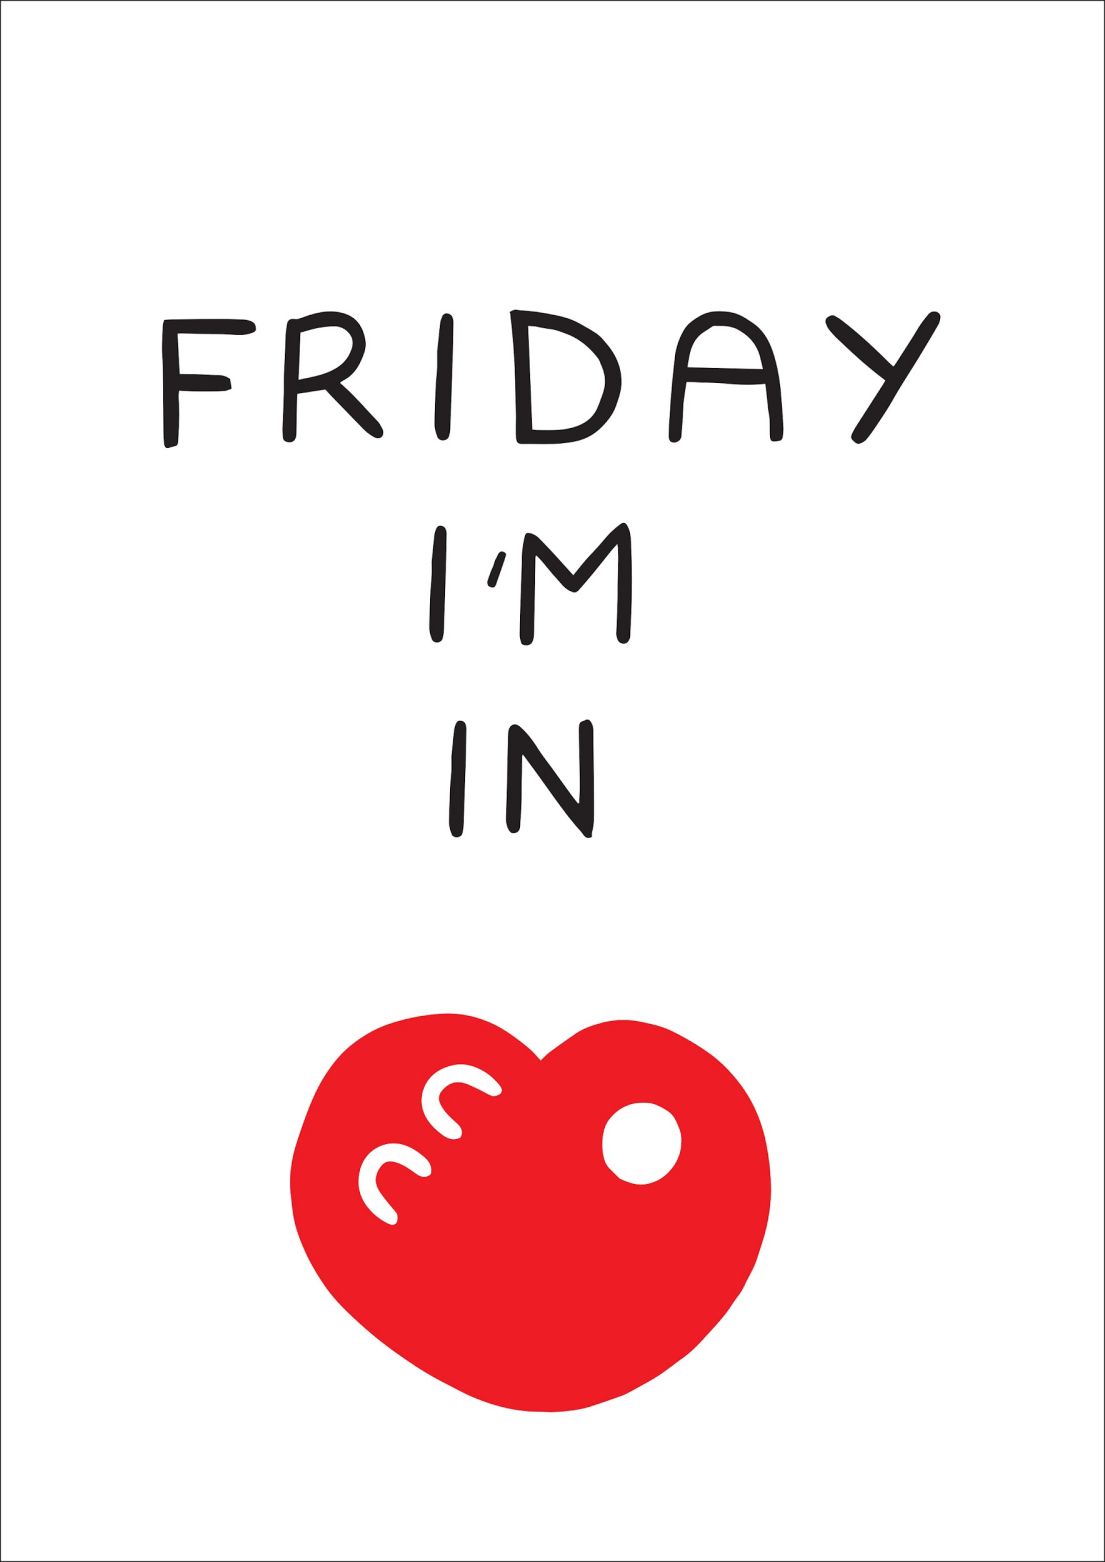 Friday I'm in Love - The Cure